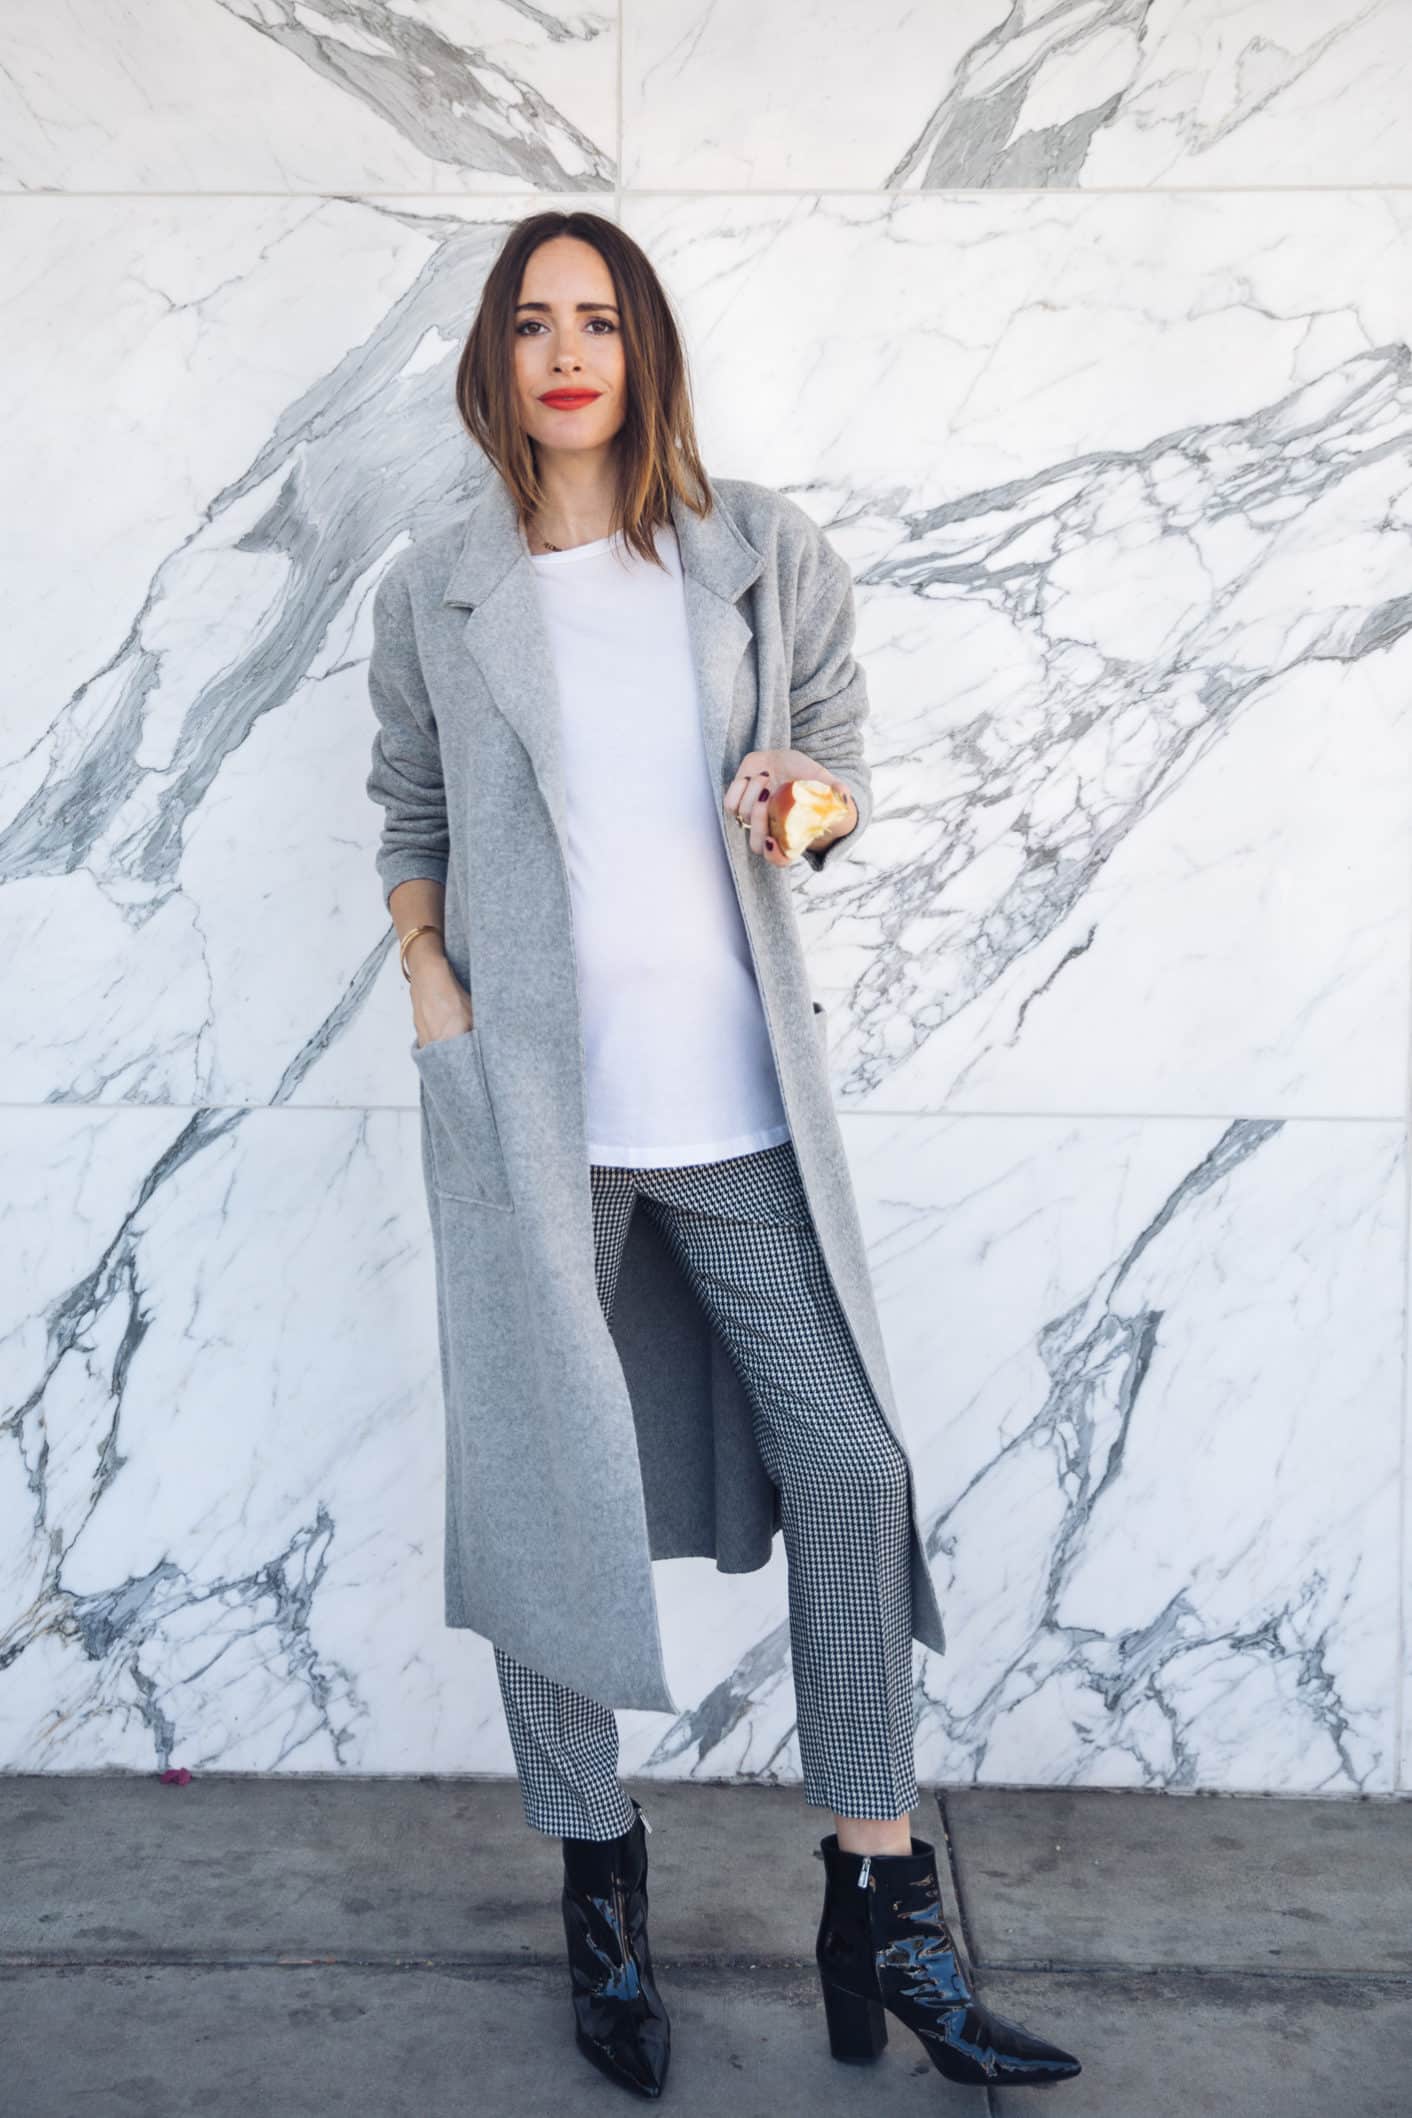 Ten Cozy Fall Coats You Need Now - Front Roe by Louise Roe